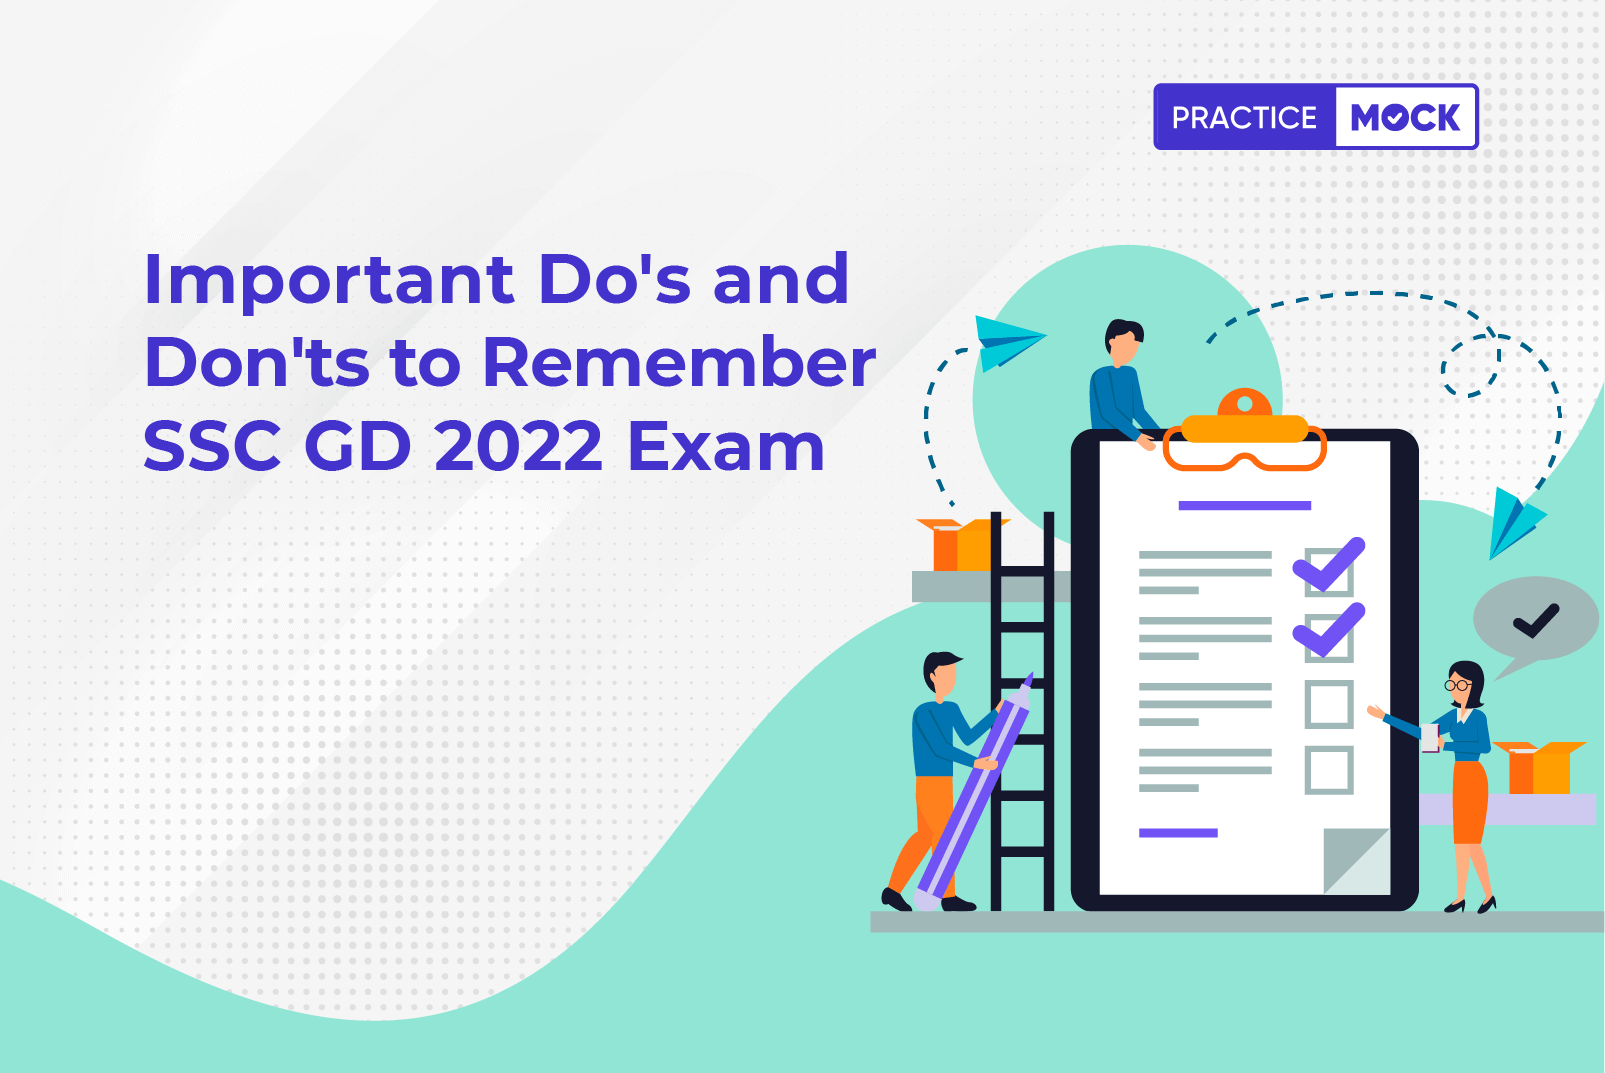 Dos and Don’ts for SSC GD 2022 Exam